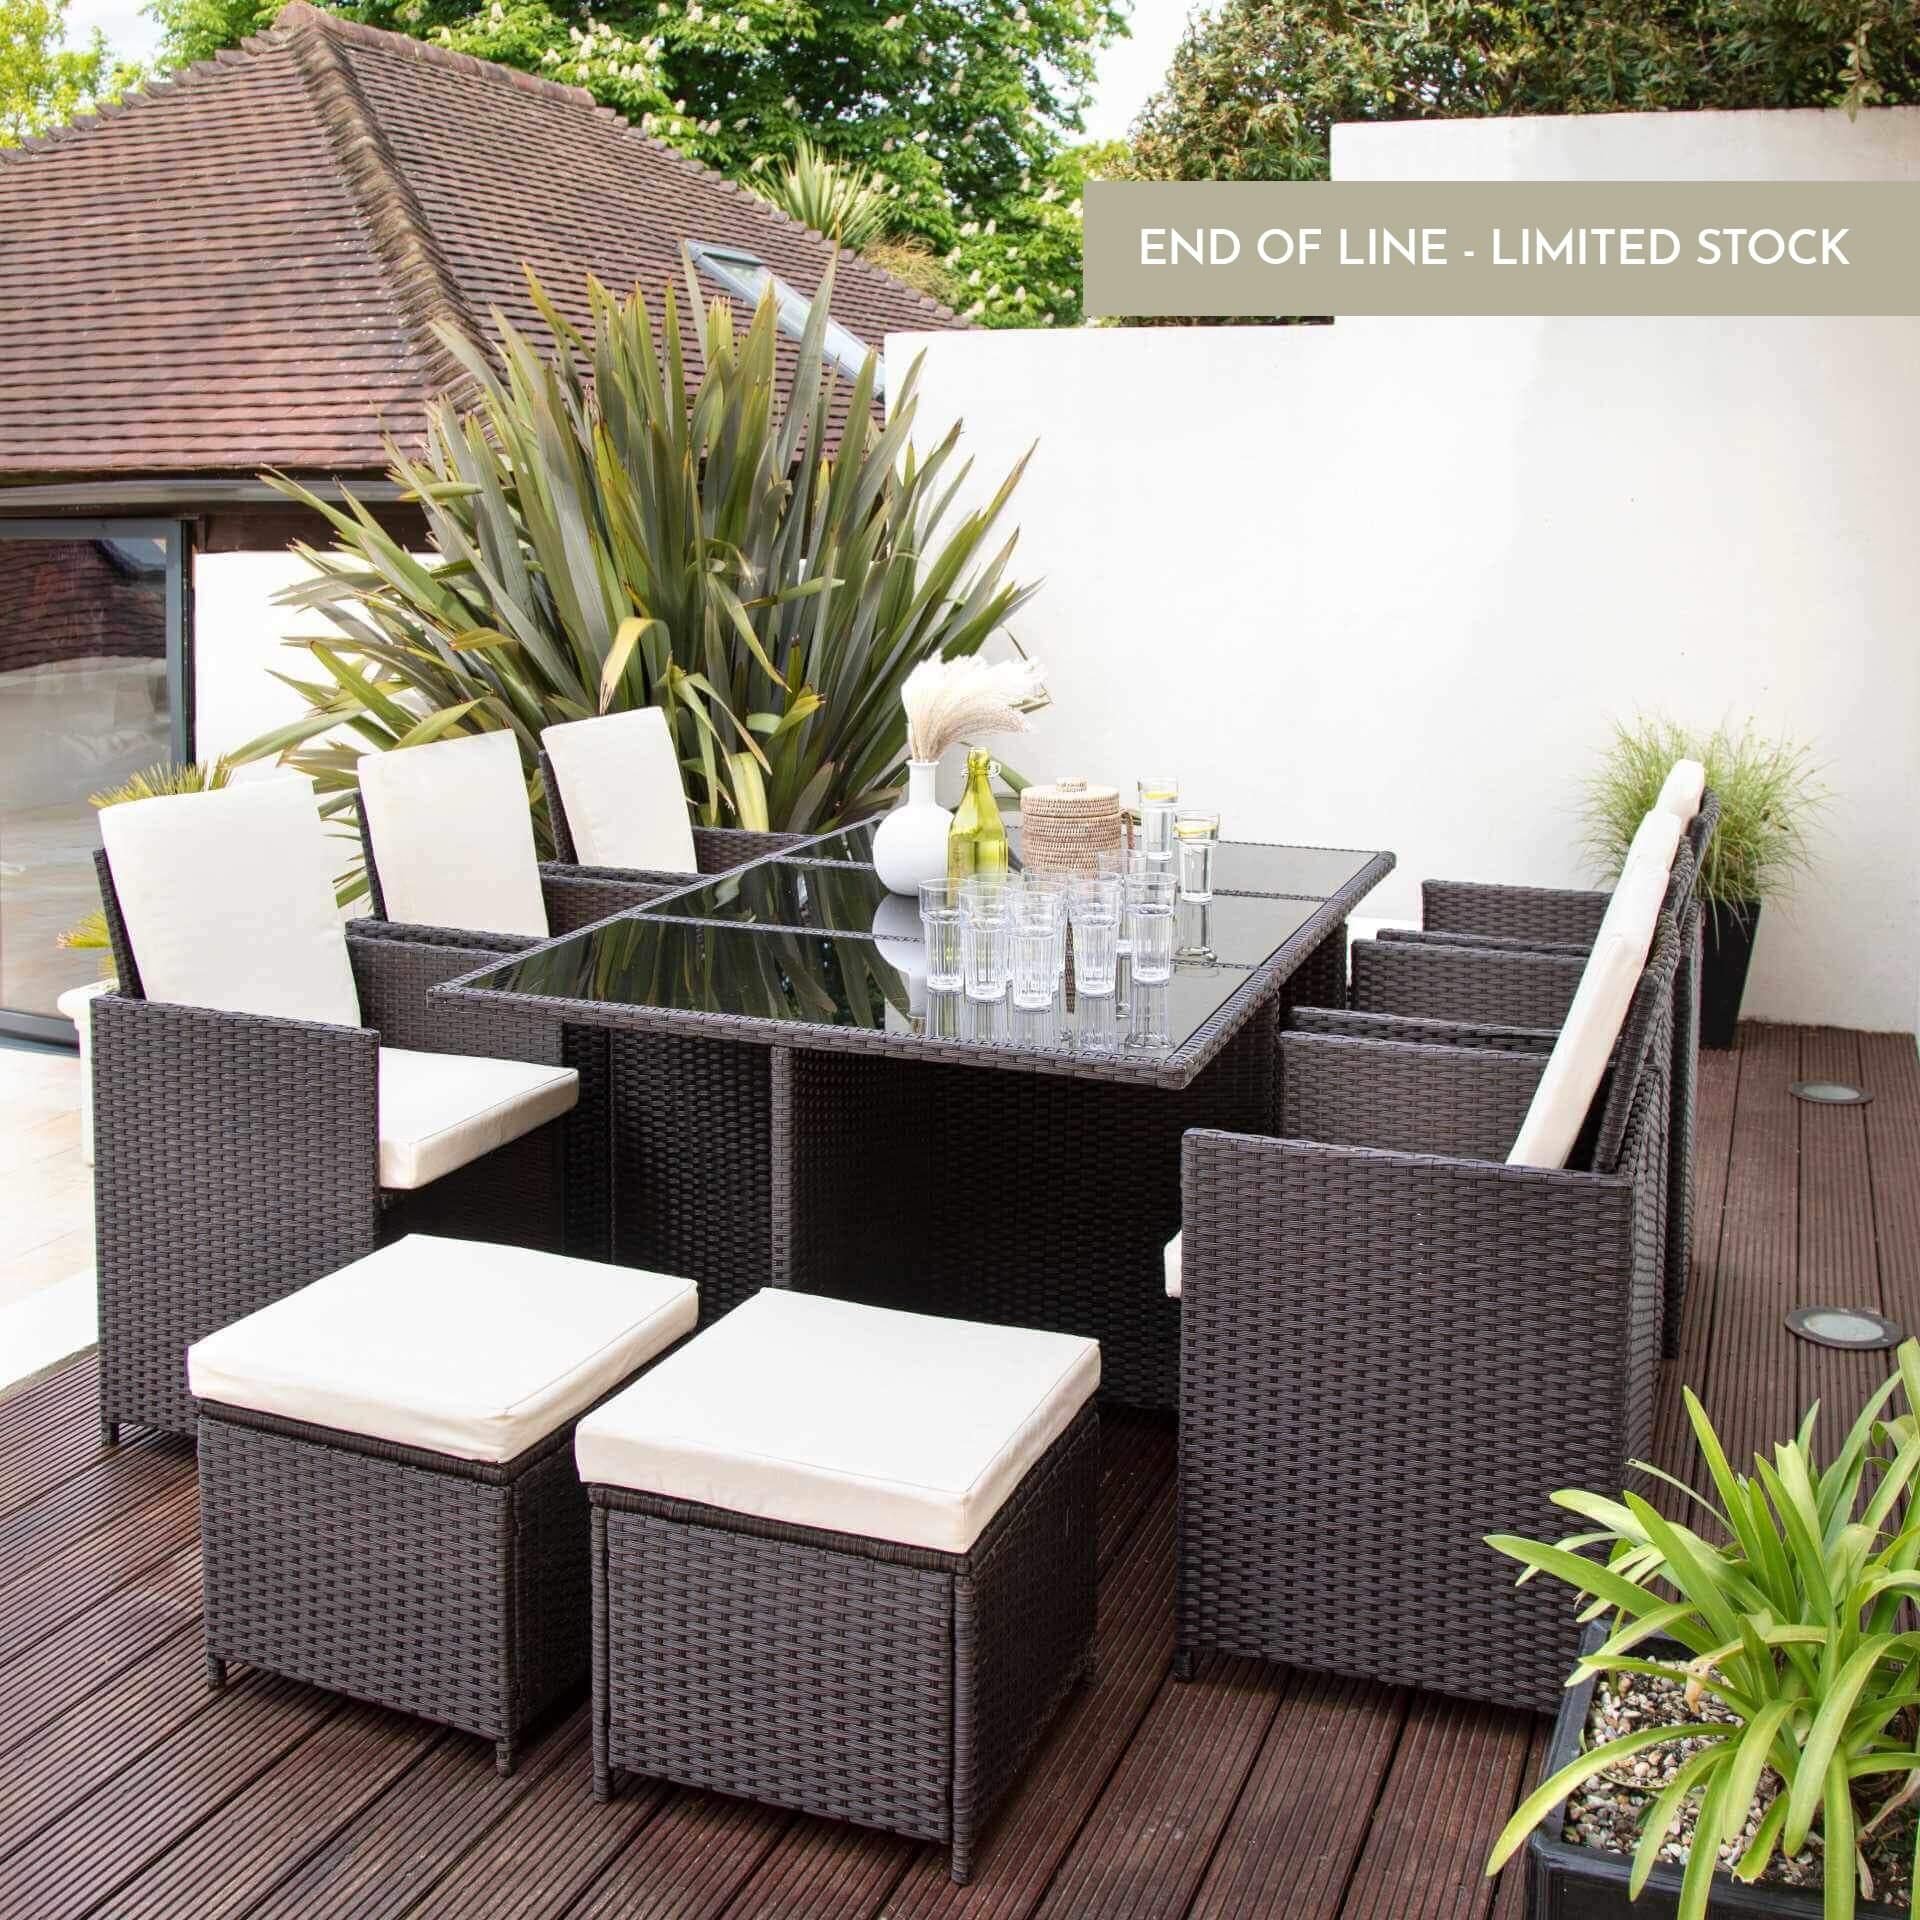 10 Seater Rattan Cube Outdoor Dining Set - Mixed Brown Weave - Laura James